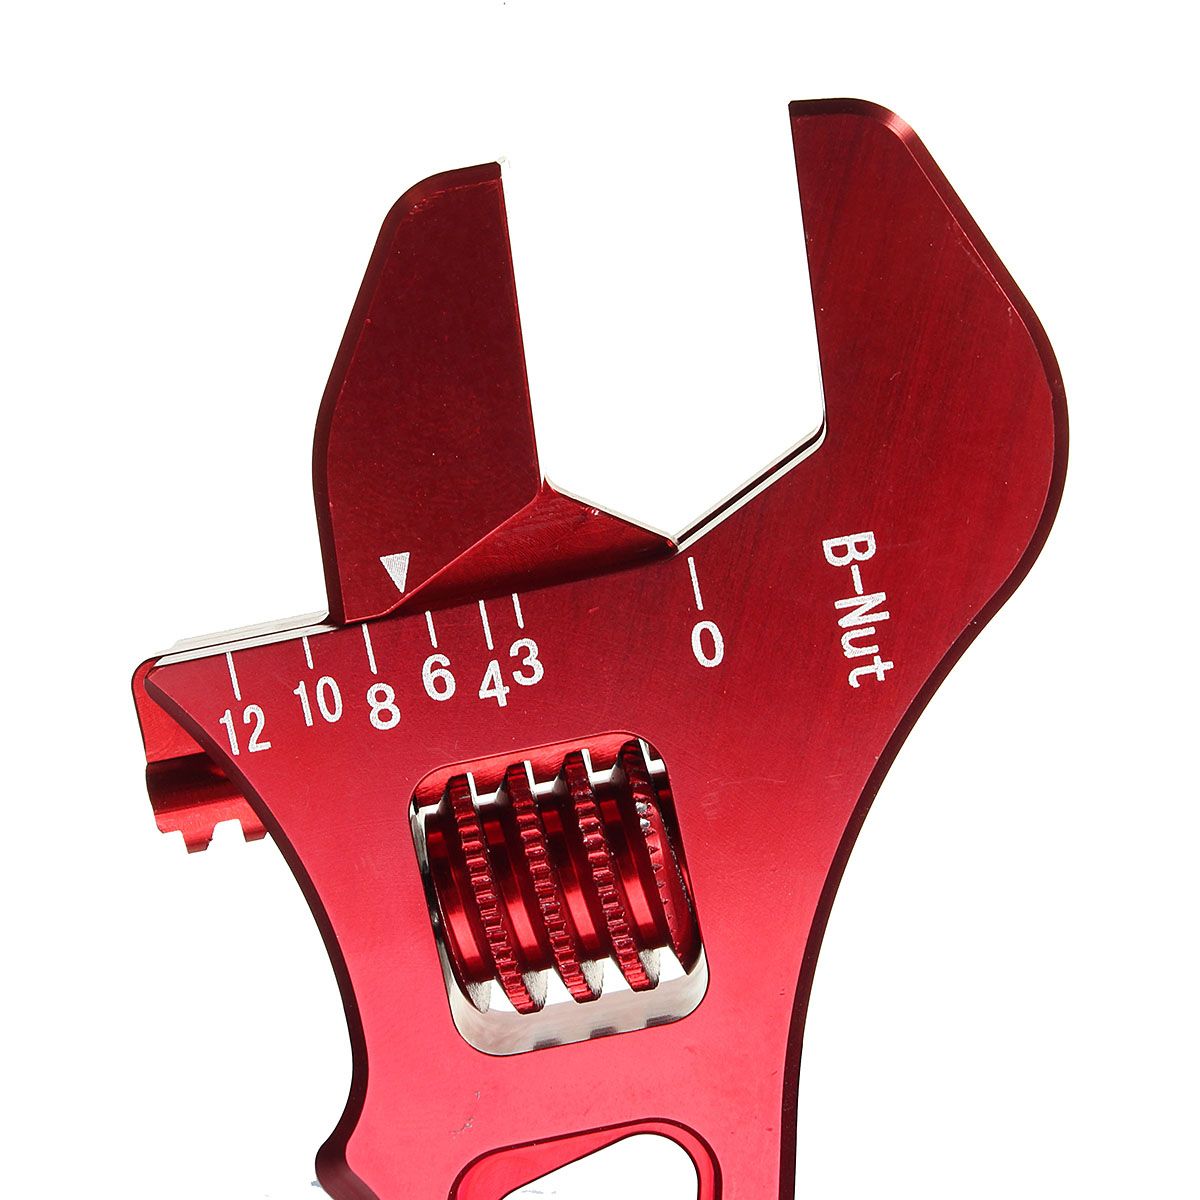 3AN-12AN-Adjustable-Aluminum-Alloy-Wrench-Fitting-Tools-Spanner-RedBlueBlack-1152302